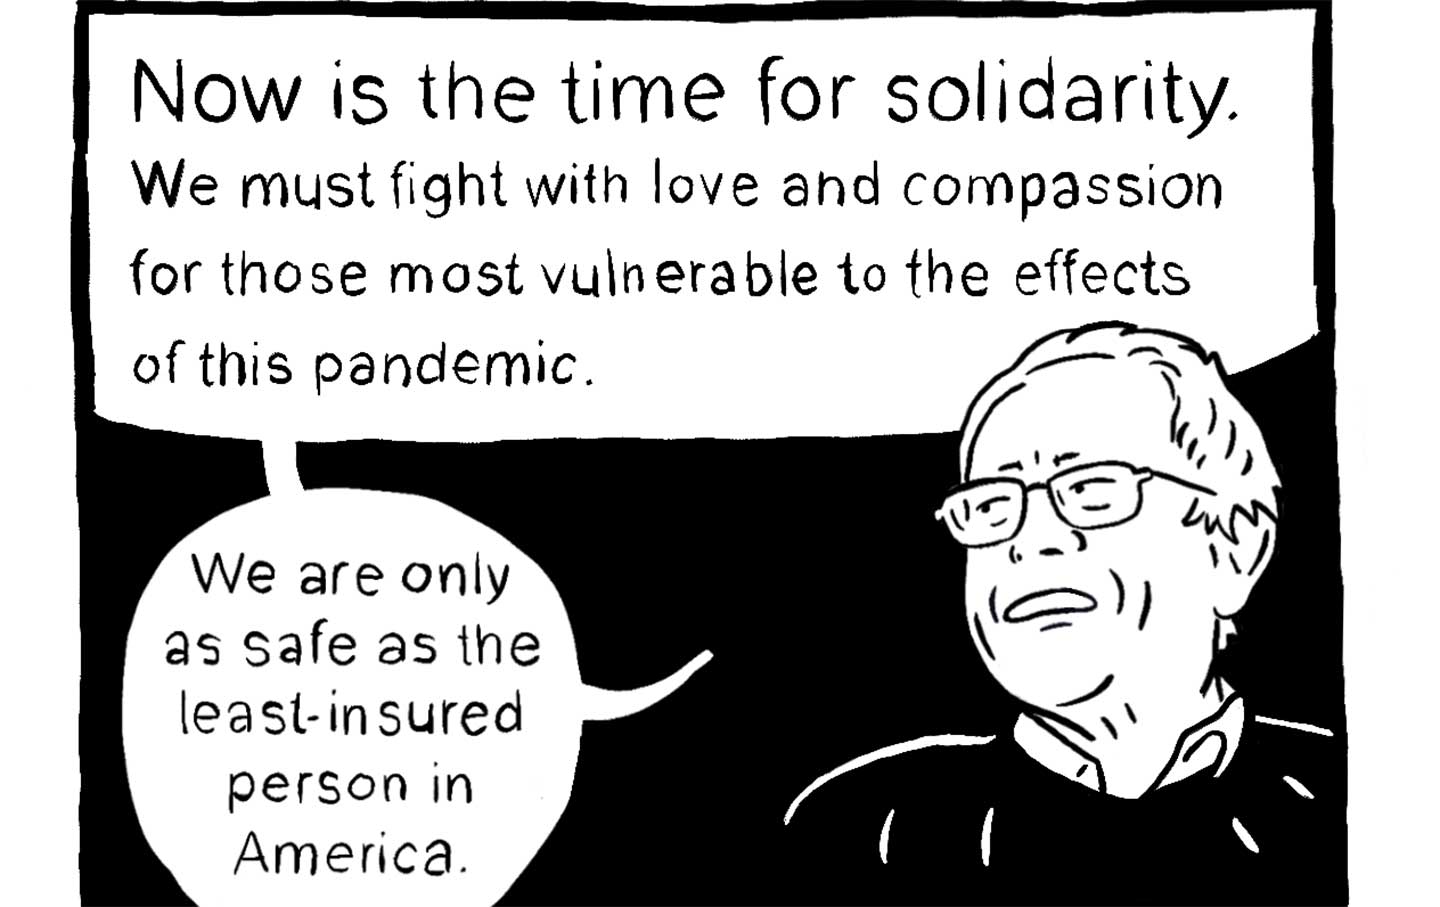 Now Is the Time for Solidarity